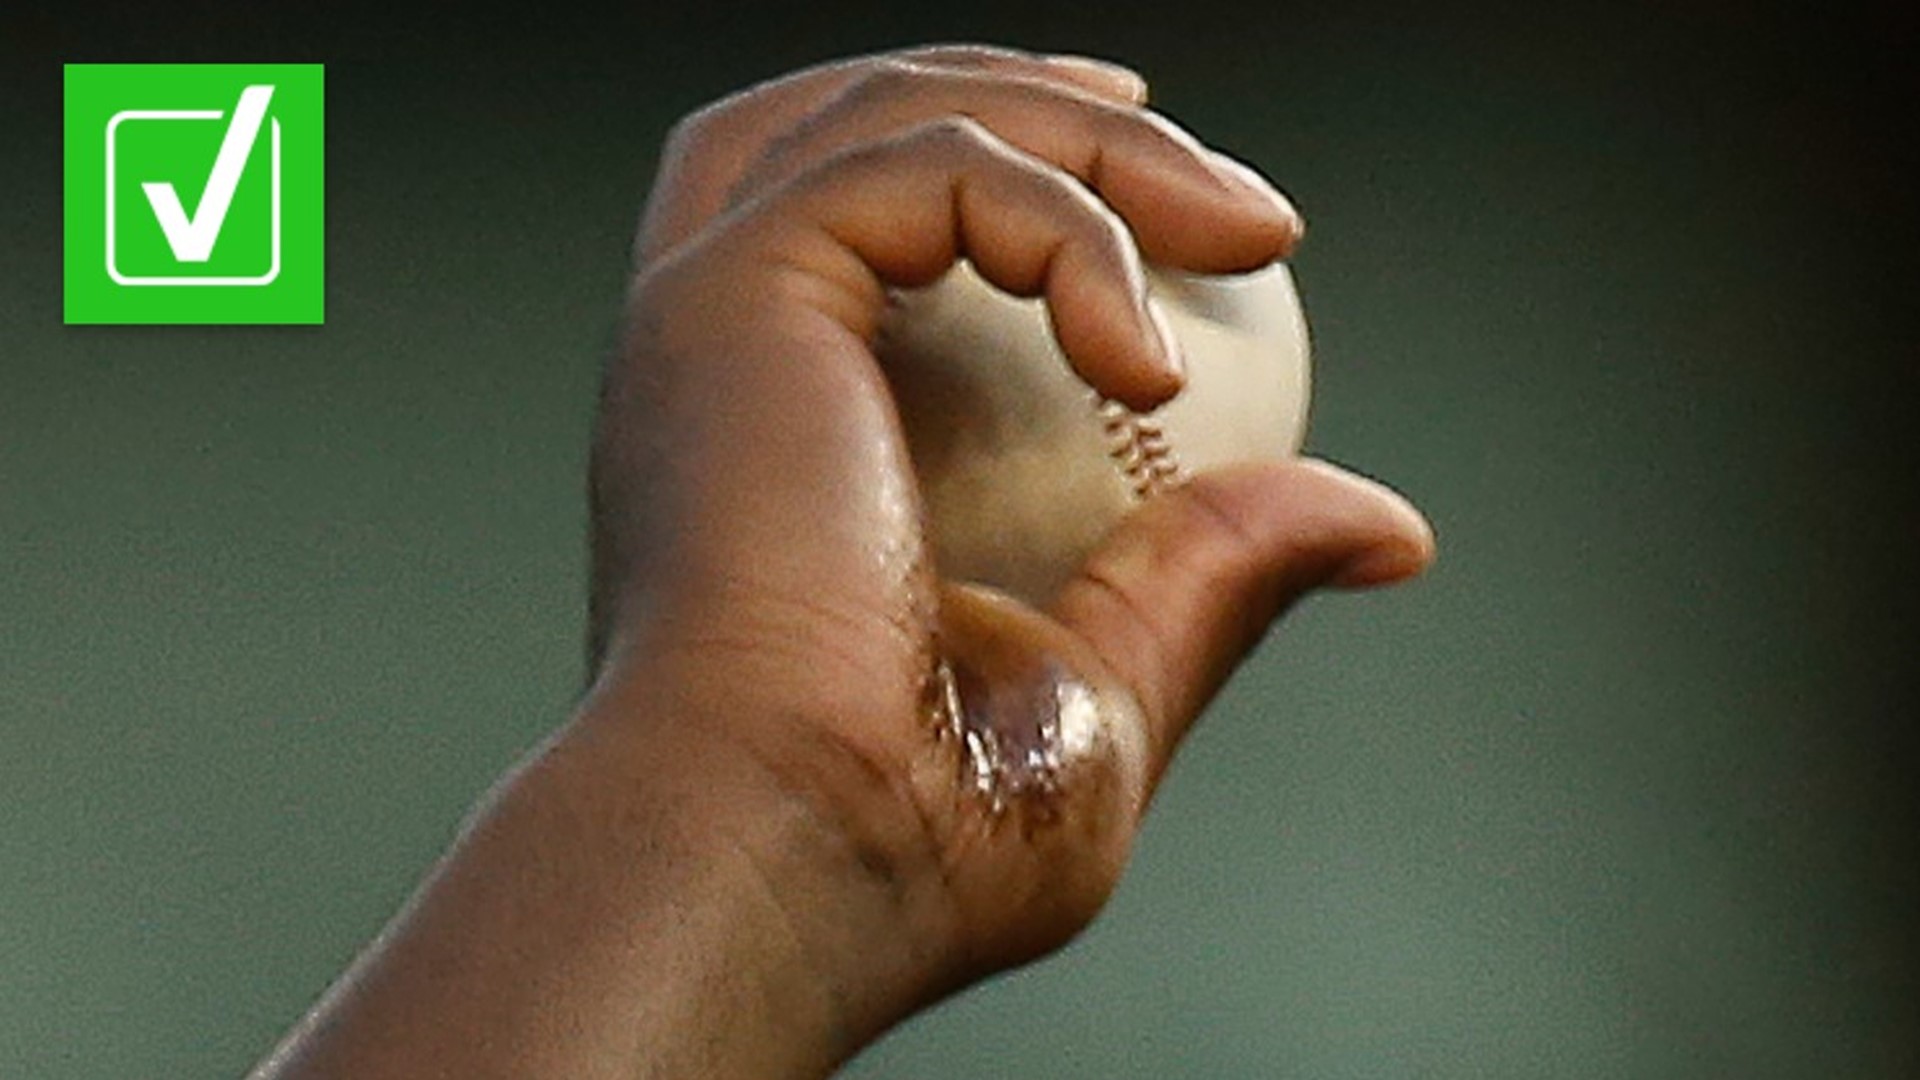 Pitchers aren’t allowed to put any foreign substance directly on the baseball and rosin is the only substance they can put on their hand.